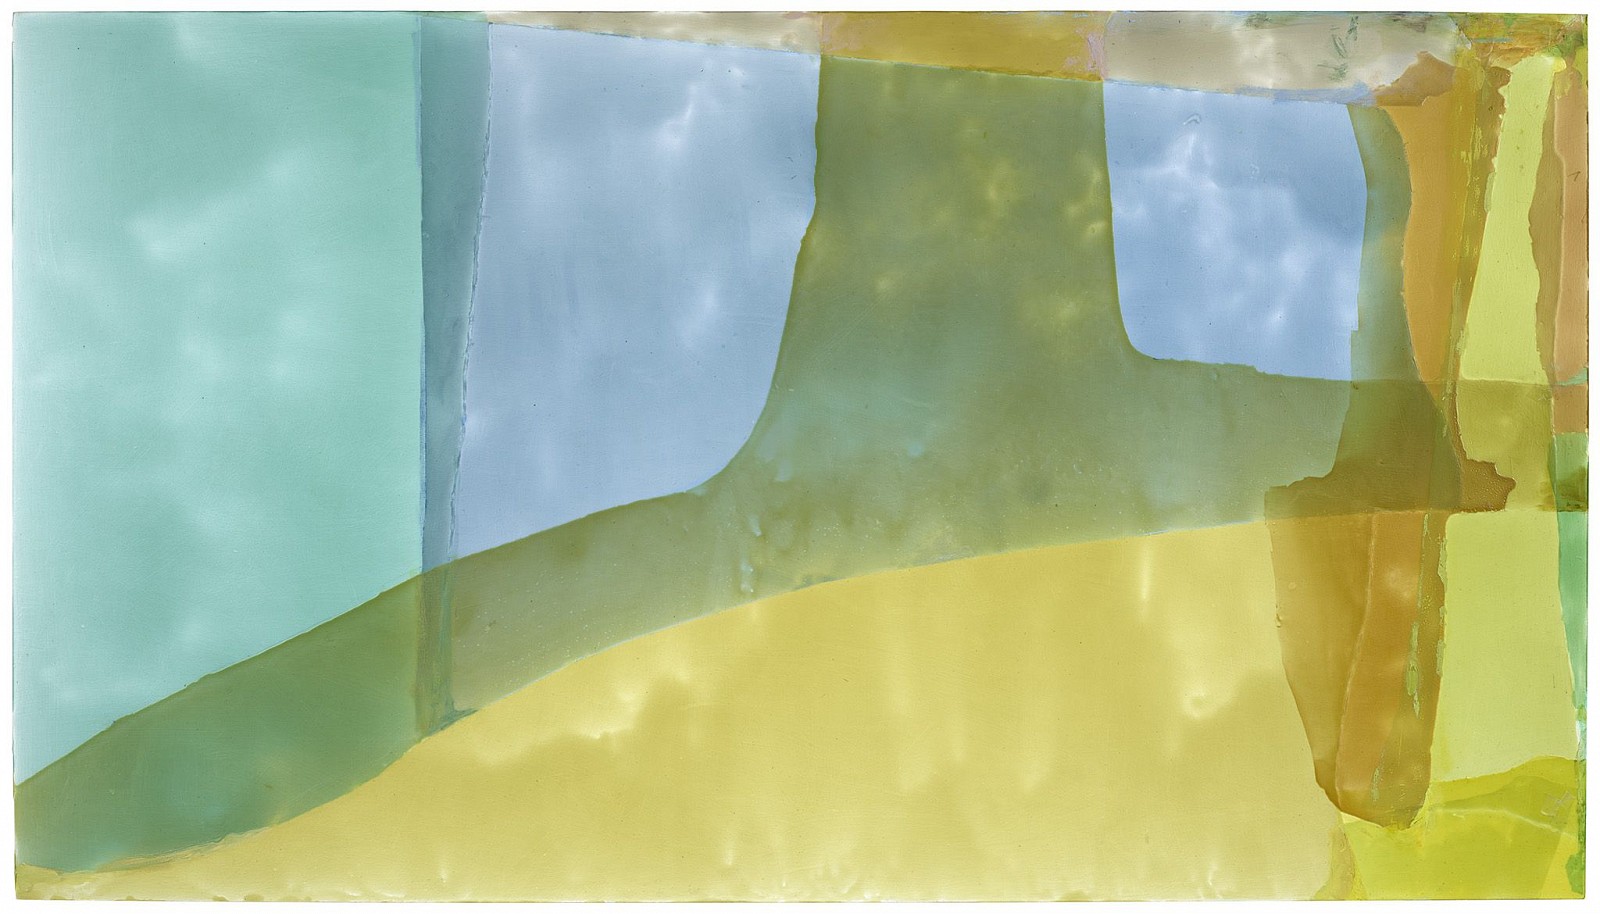 Jill Nathanson, Near Distance, 2022
Acrylic and polymers with oil on panel, 43 x 78 in. (109.2 x 198.1 cm)
NAT-00153